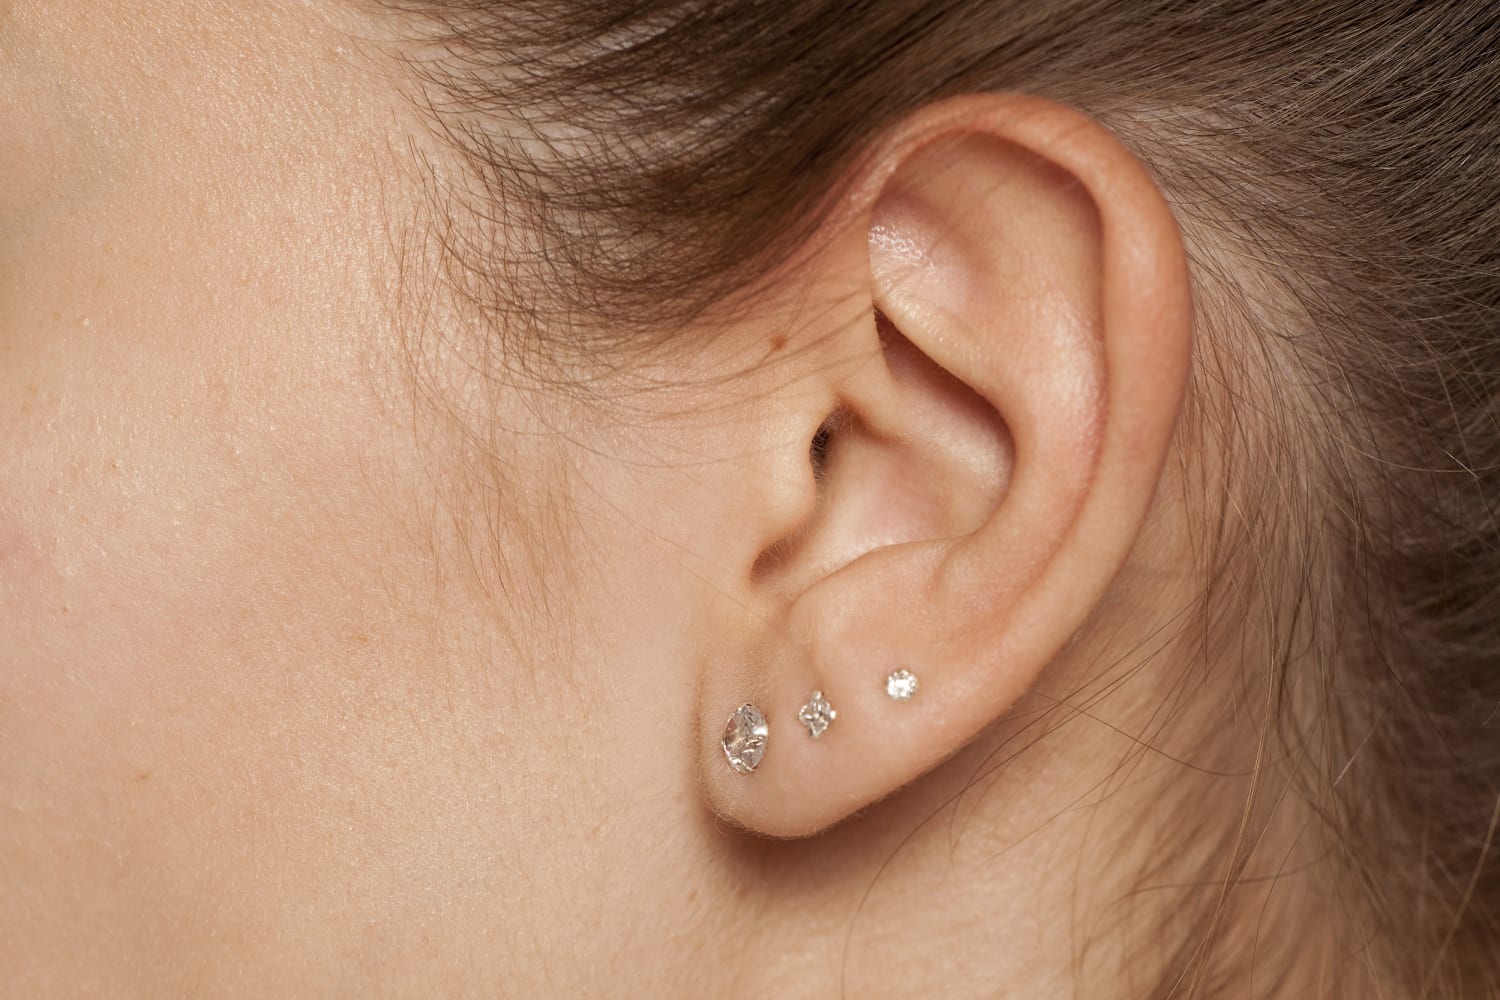 infected ear piercing hole